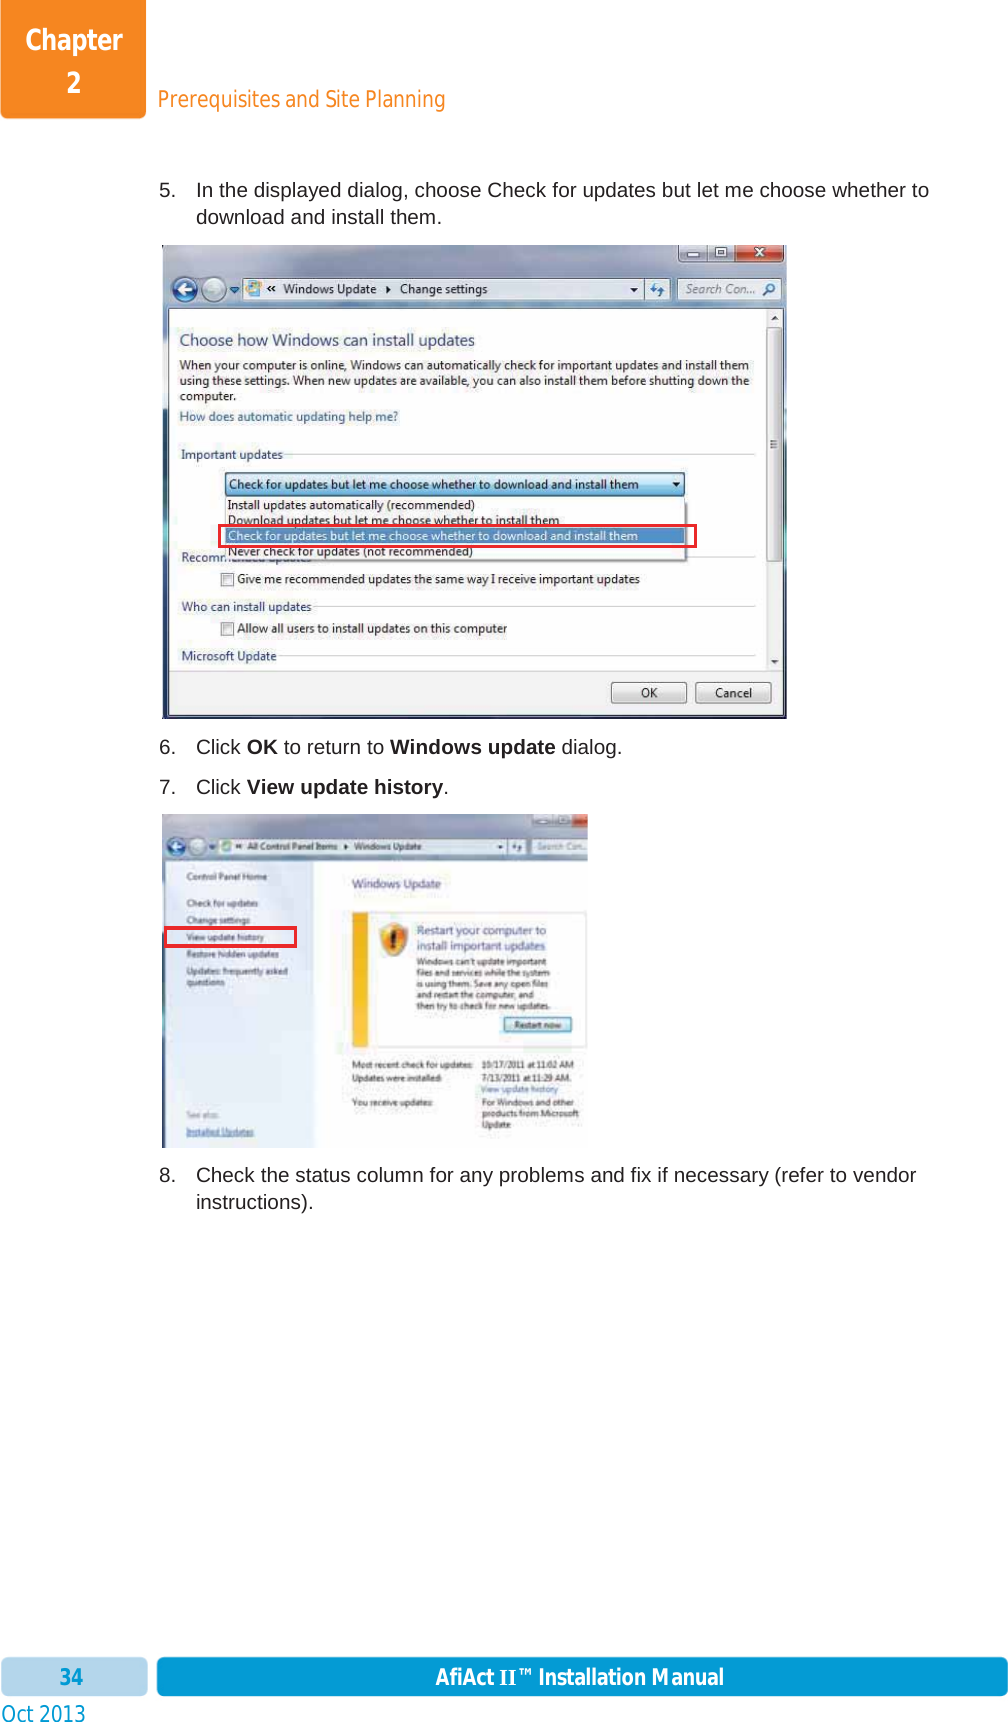 Prerequisites and Site PlanningChapter 2Oct 2013 AfiAct II™ Installation Manual345.  In the displayed dialog, choose Check for updates but let me choose whether to download and install them.  6. Click OK to return to Windows update dialog. 7. Click View update history.8.  Check the status column for any problems and fix if necessary (refer to vendor instructions). 